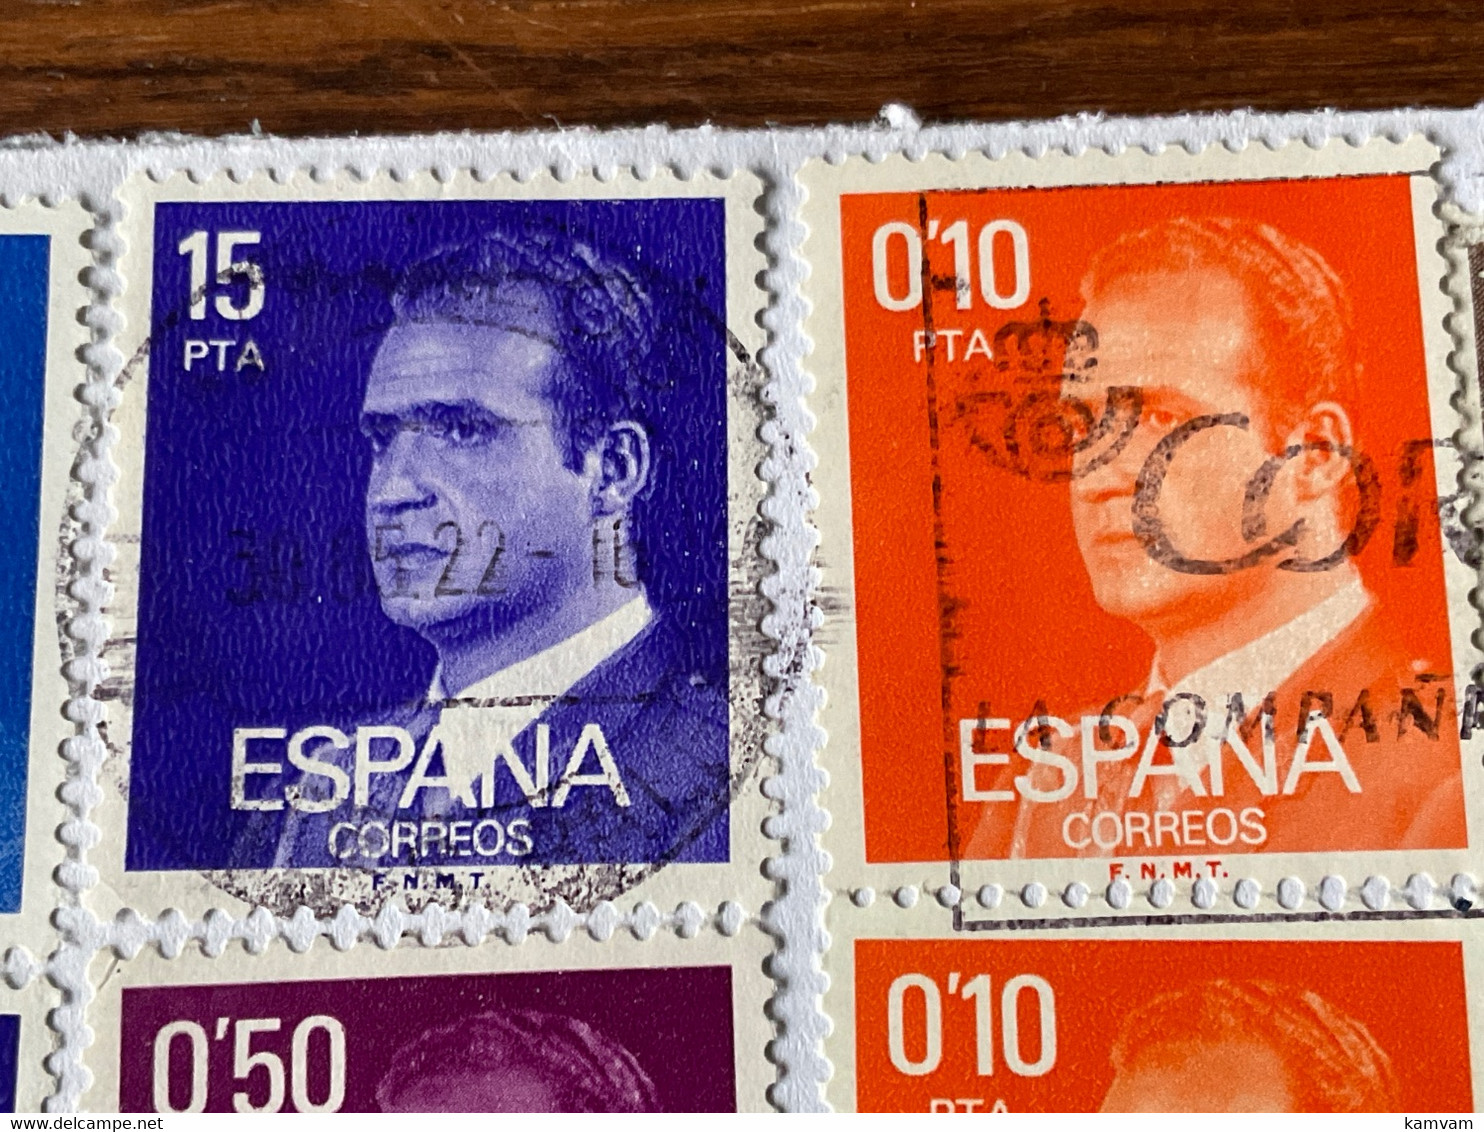 España - Spain Cover - Lettre 2022 - Pta Stamps Used Beyond Validity - Timbres PTA Utilisé Hors Validité - Covers & Documents